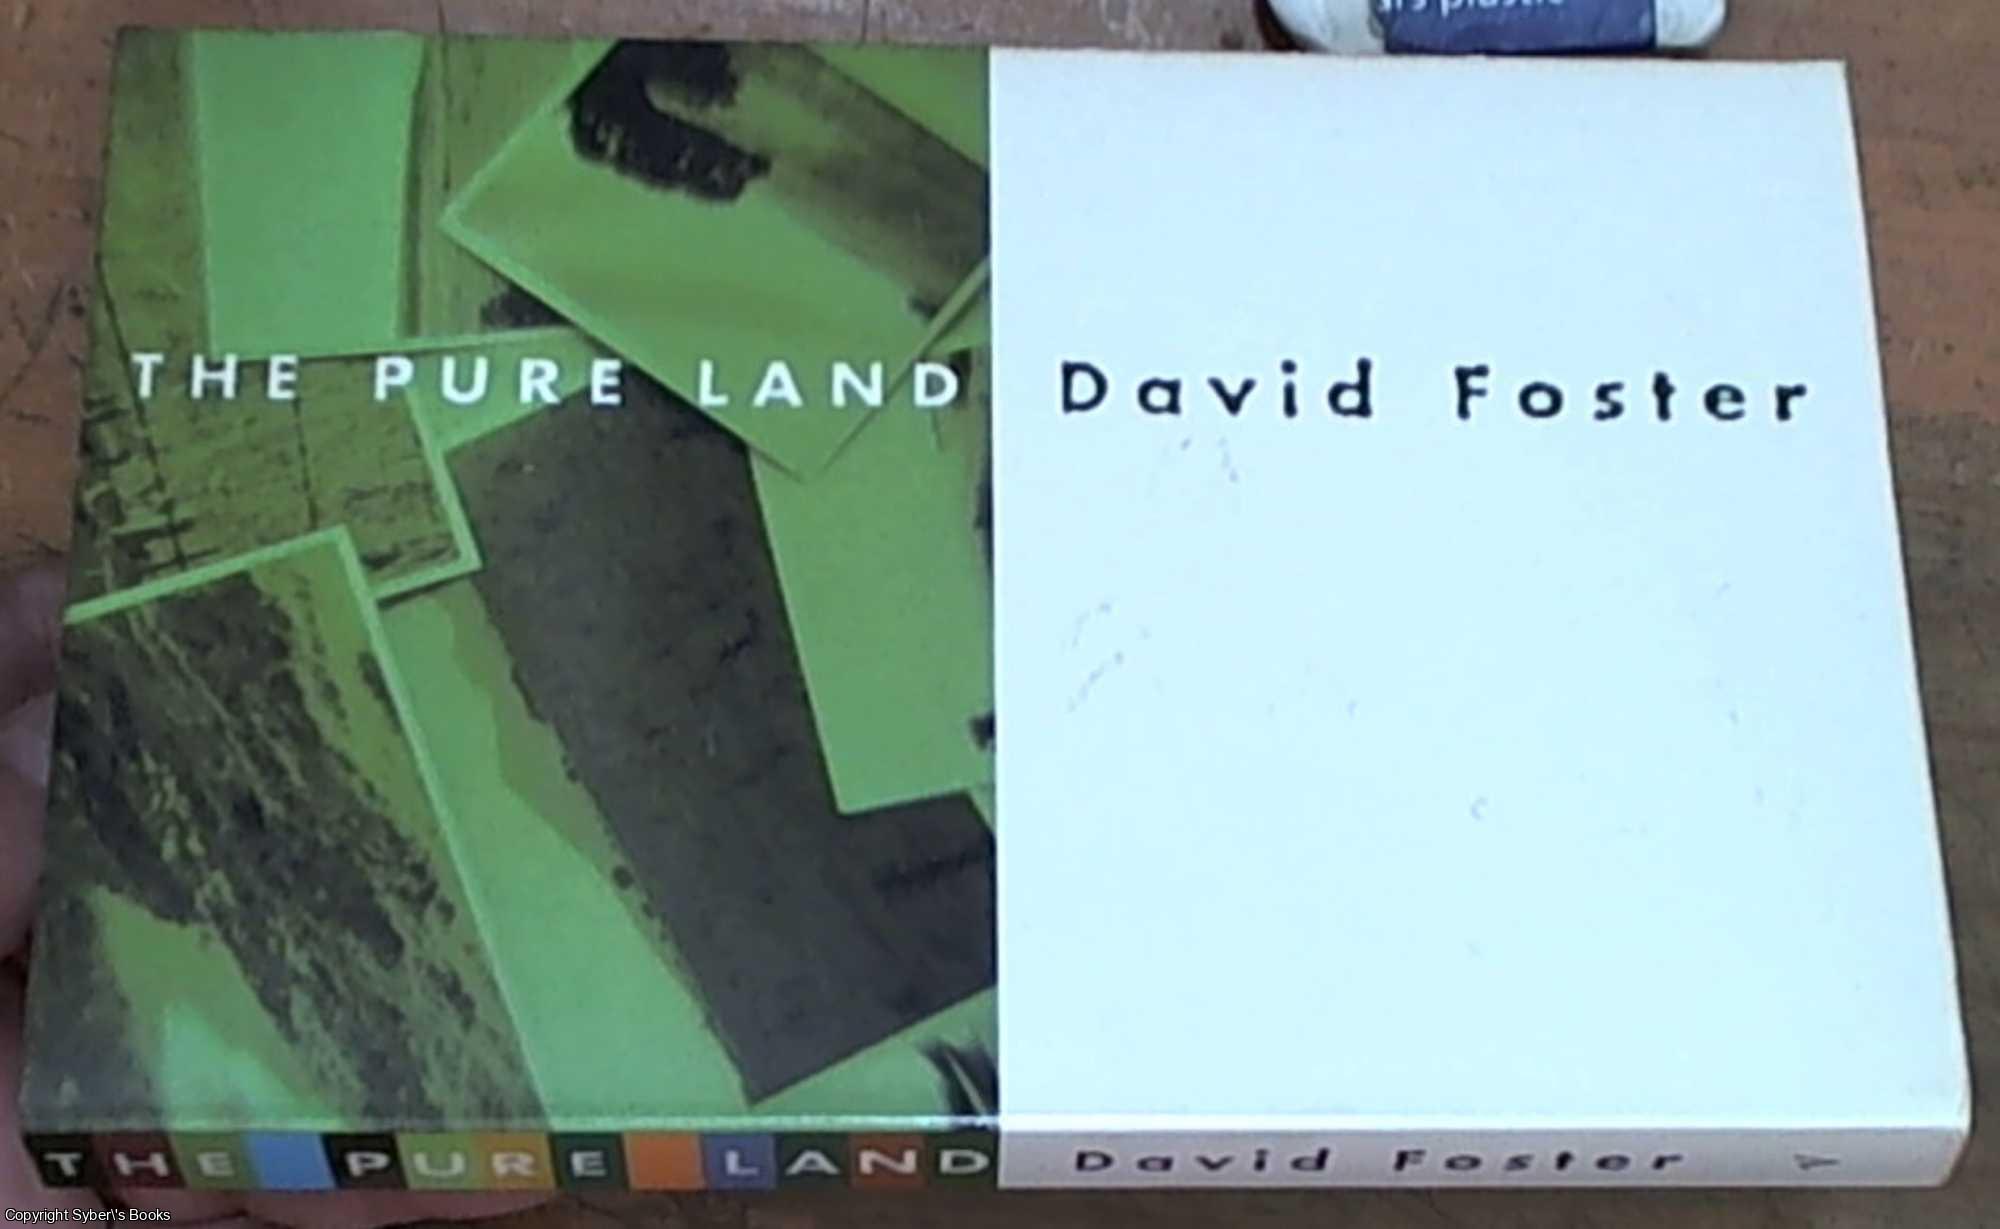 Foster, David - the pure land